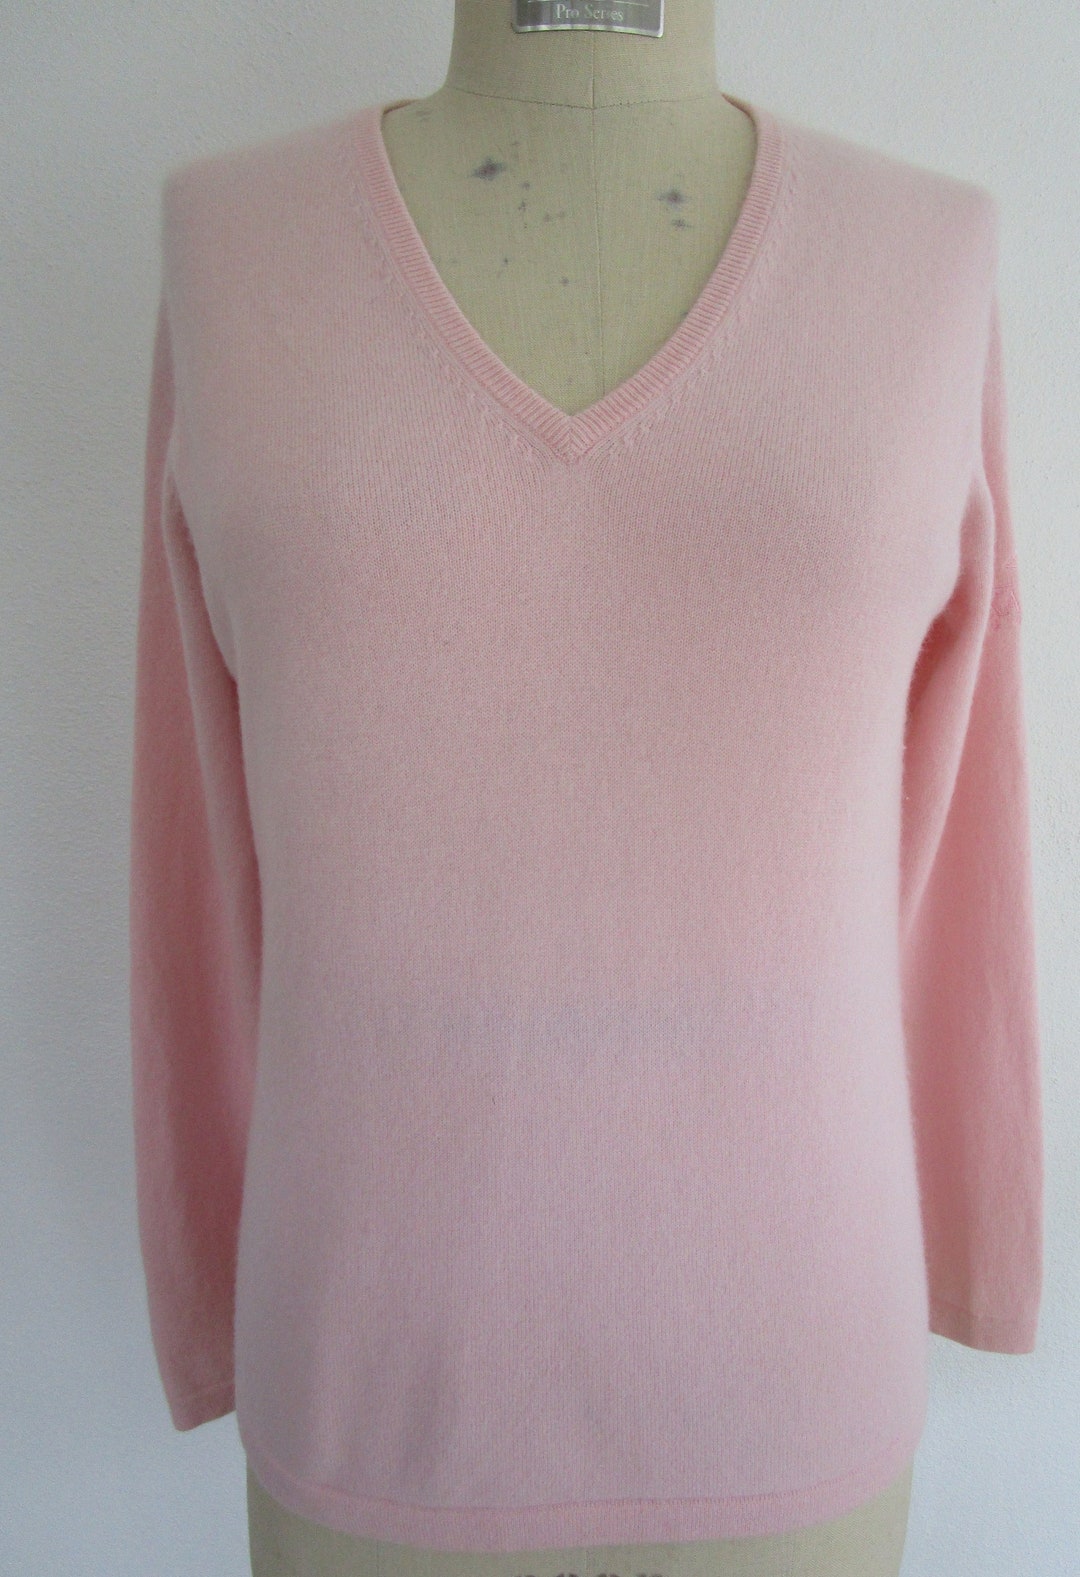 L Kalos Golf CASHMERE Pullover Knit Pink Sweater Peter Millar - Etsy